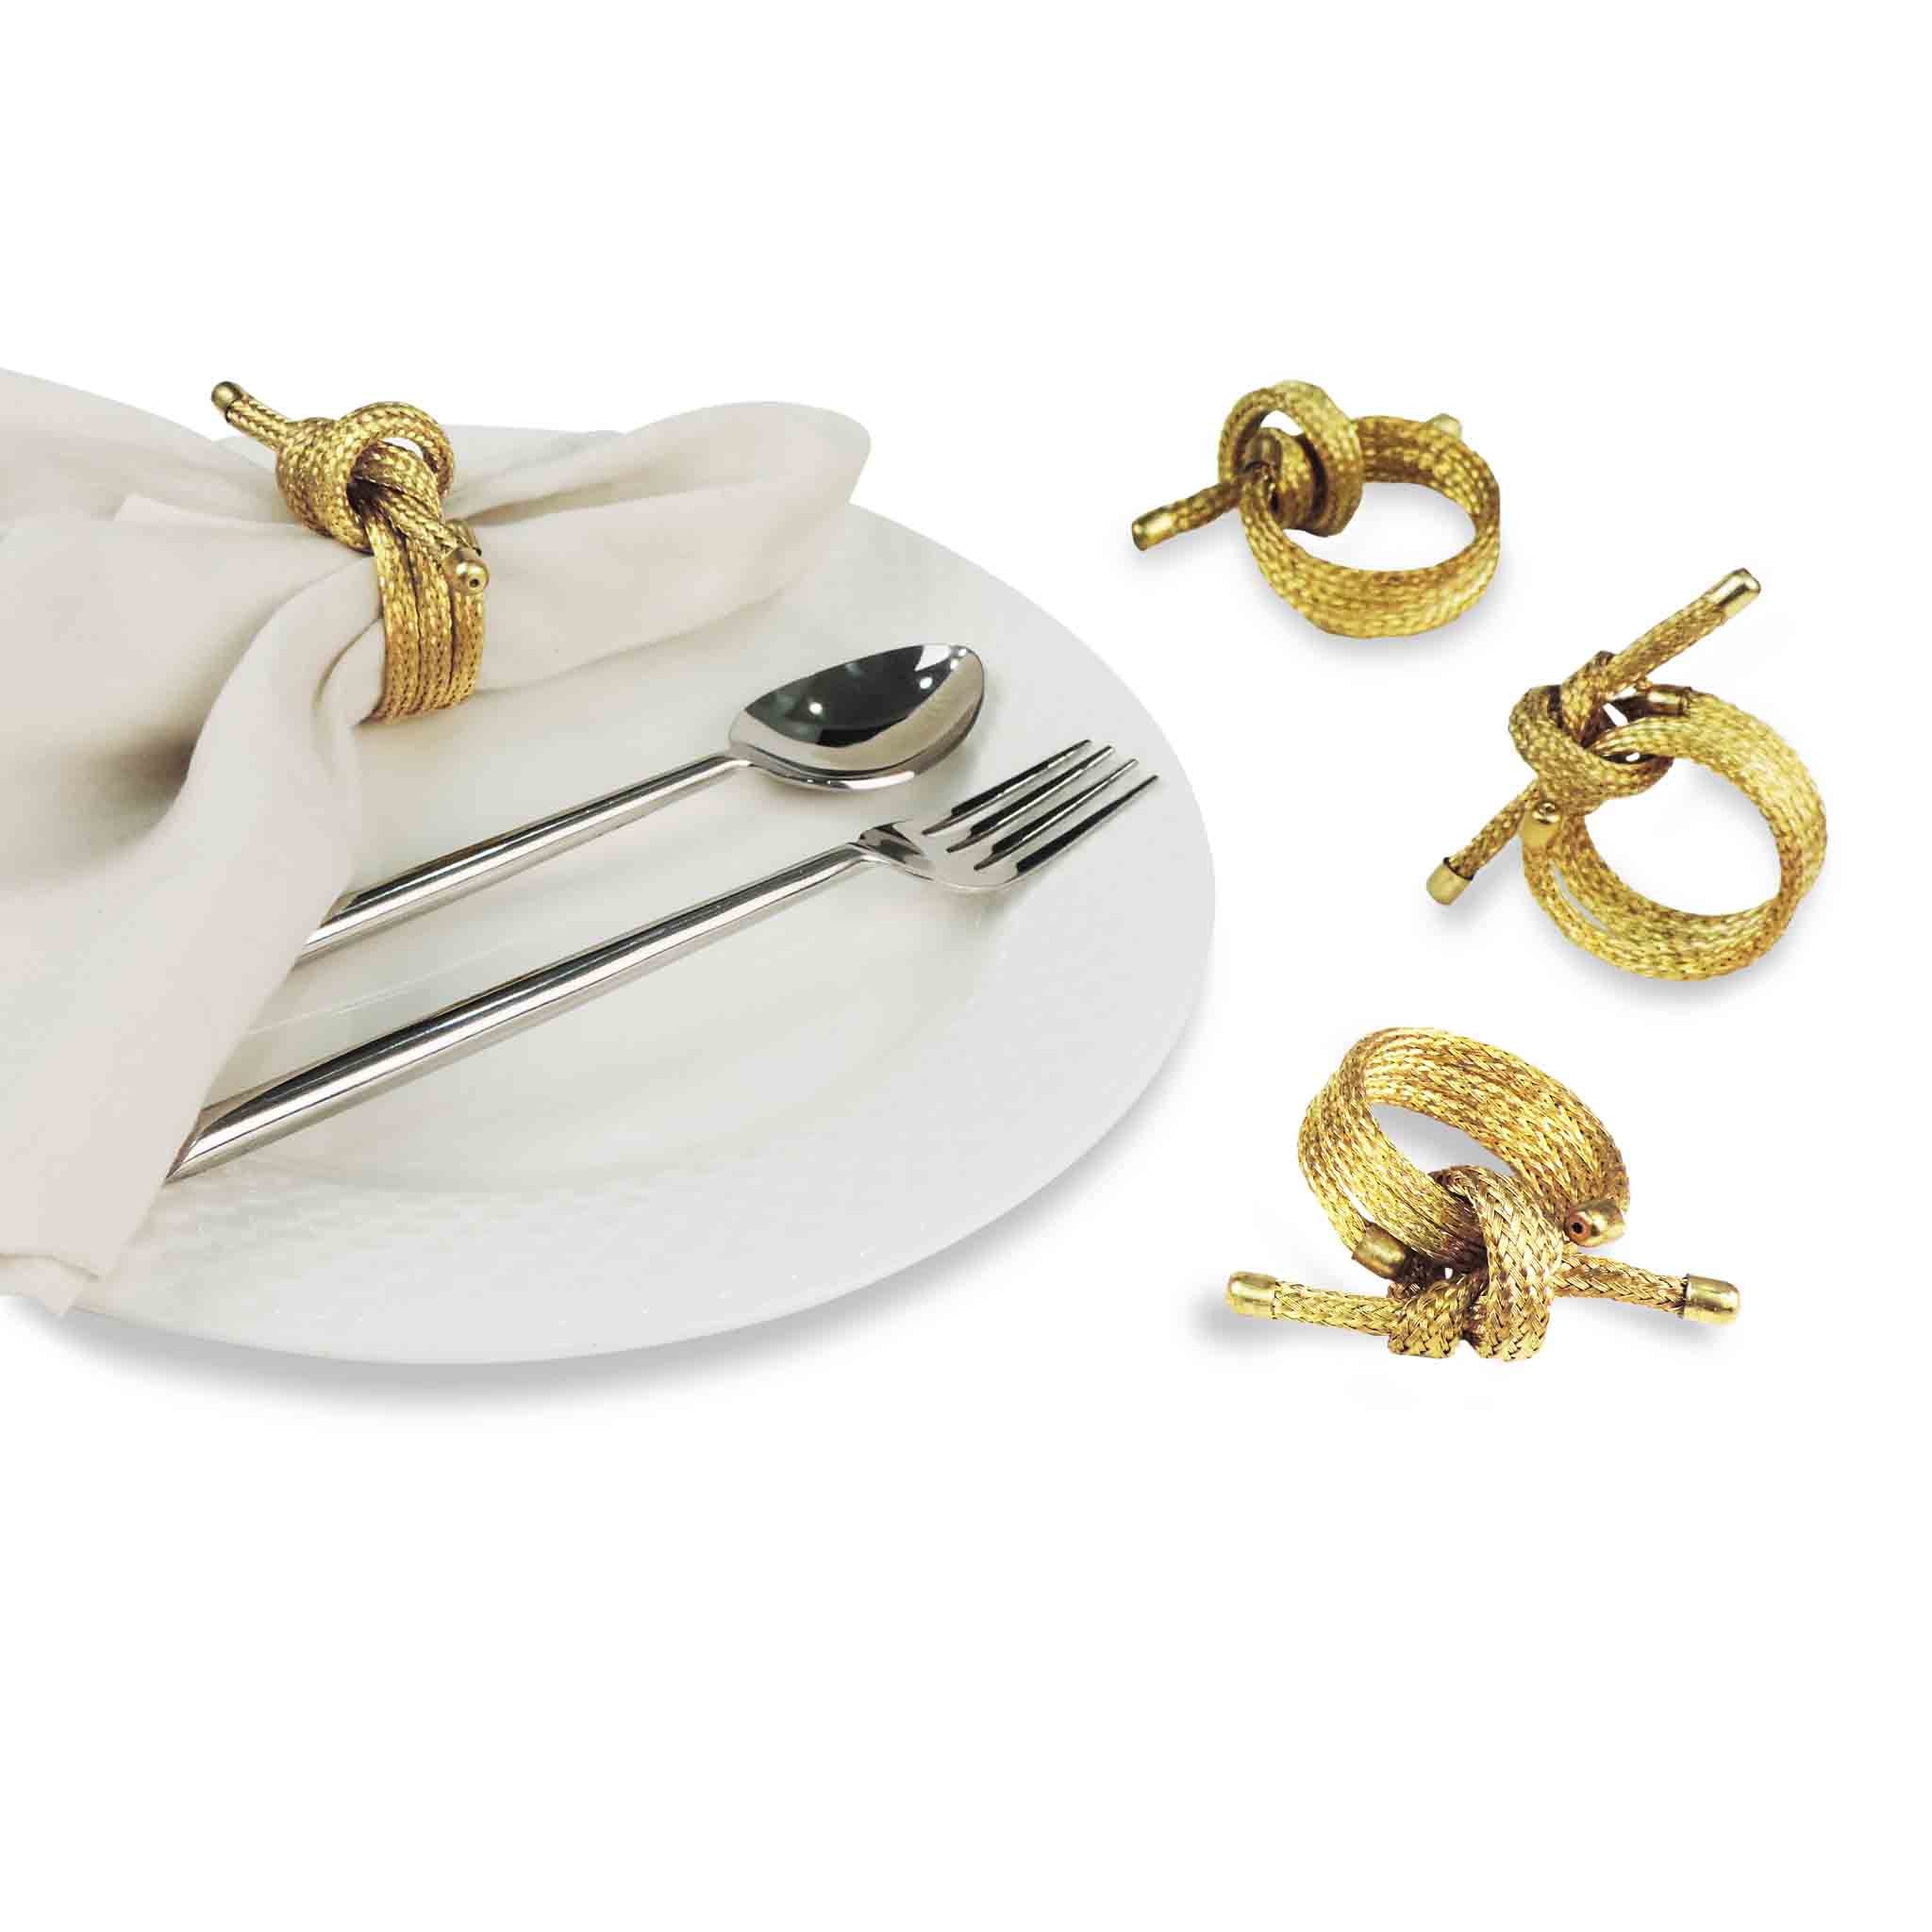 Glass Bead Table Setting for 4 - Placemats & Napkin Rings in Gold